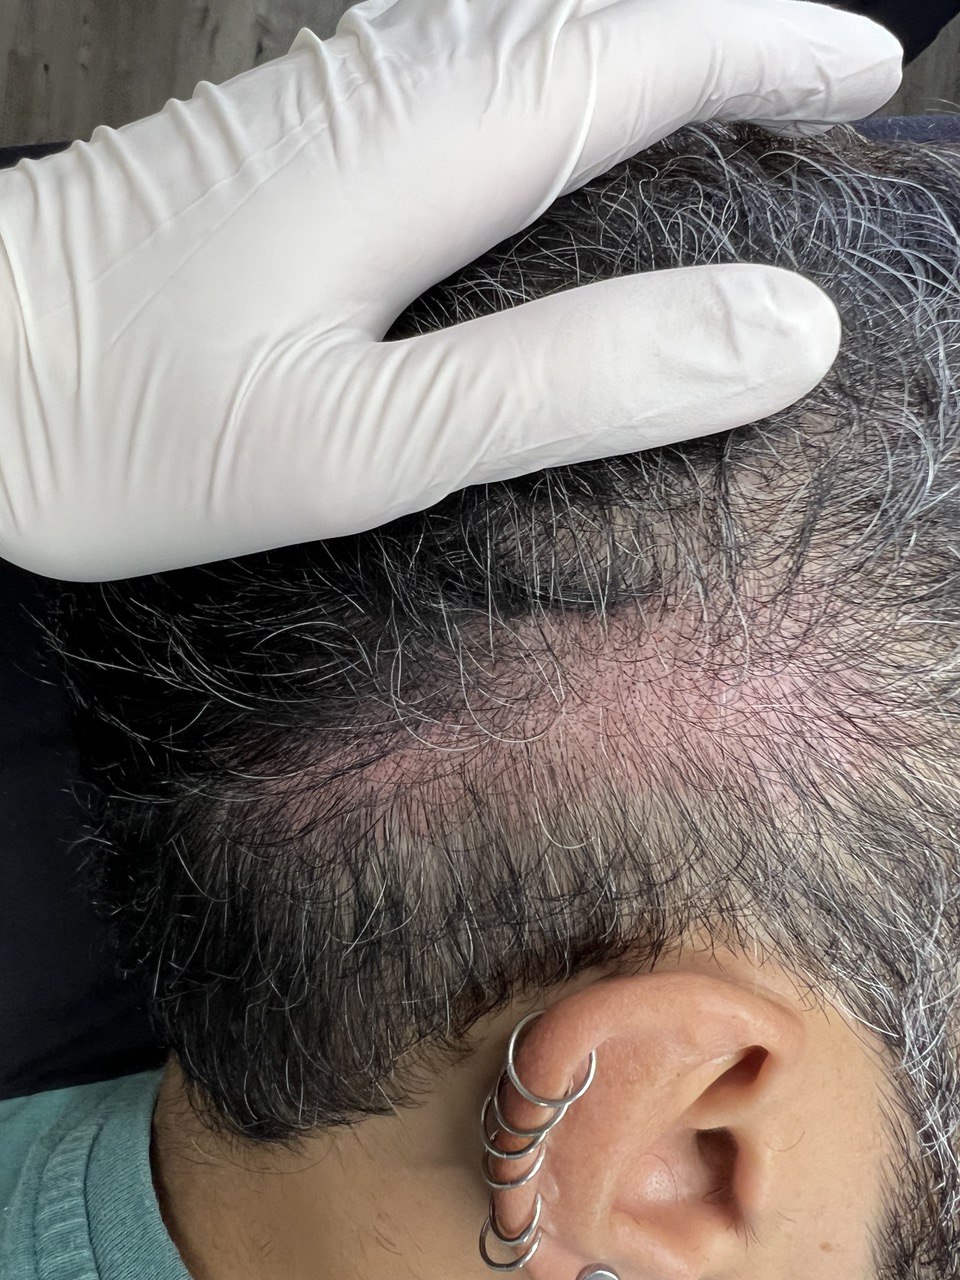 FUT Hair Transplant Camouflage (SMP). Cosmetic and Mediical Tattoo by Dasha. Permanent makeup and reconstructive tattoo, scalp micro-pigmentation in Christchurch, New Zealand